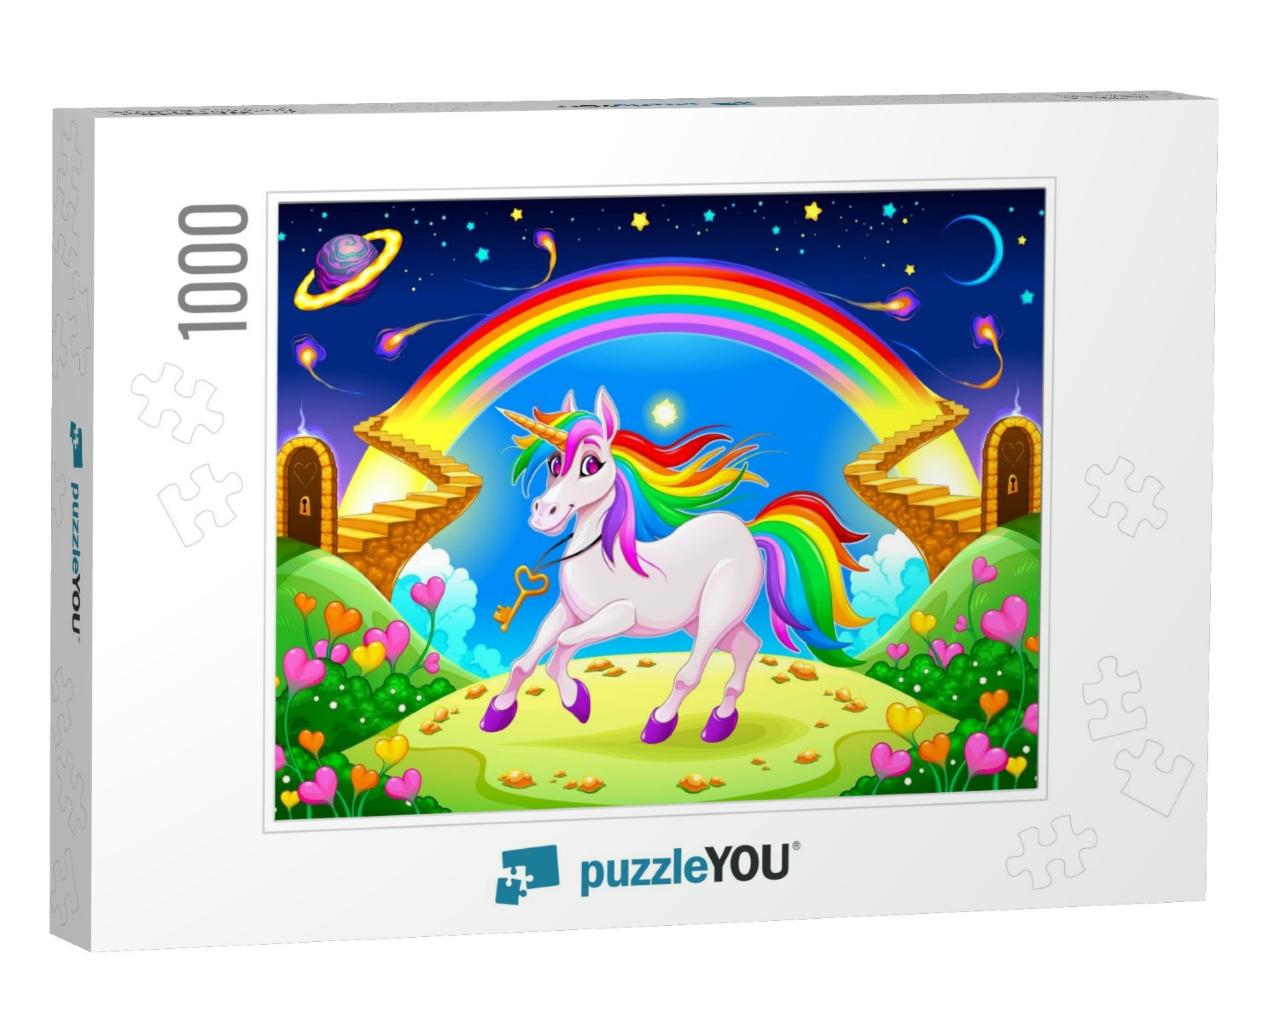 Rainbow Unicorn in a Fantasy Landscape with Golden Stairs... Jigsaw Puzzle with 1000 pieces